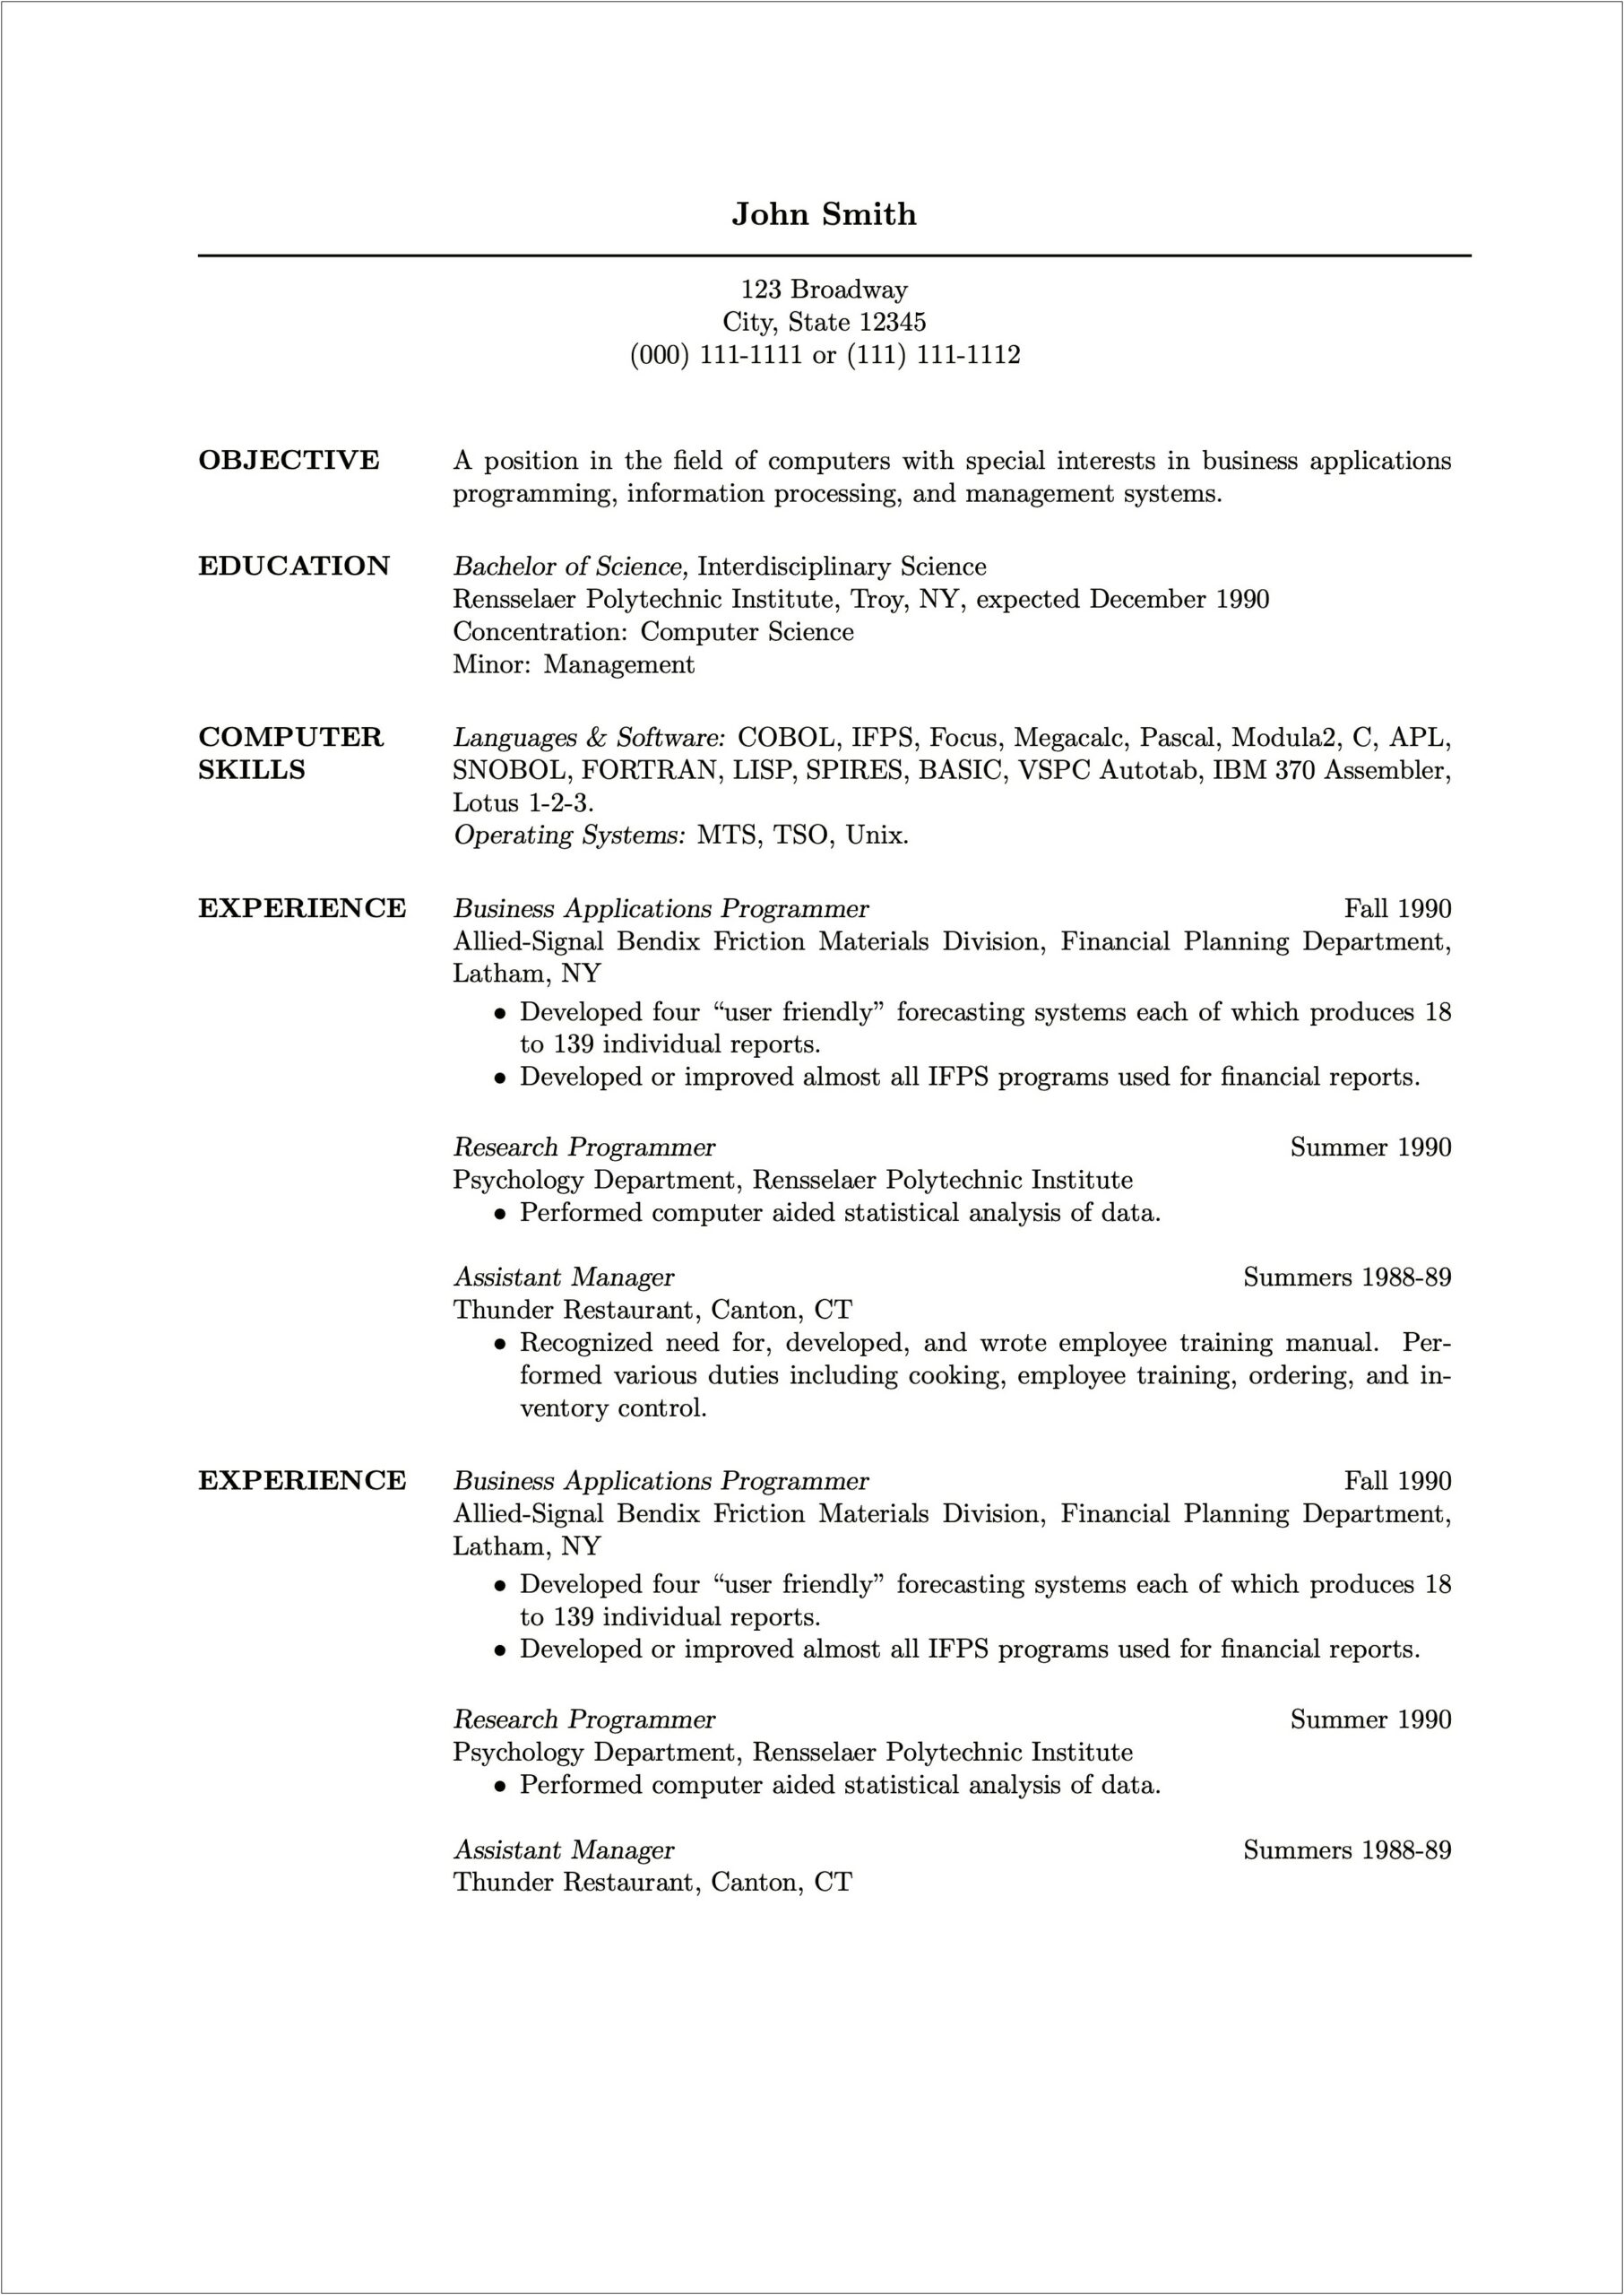 Separate Academic And Industry Experience Resume